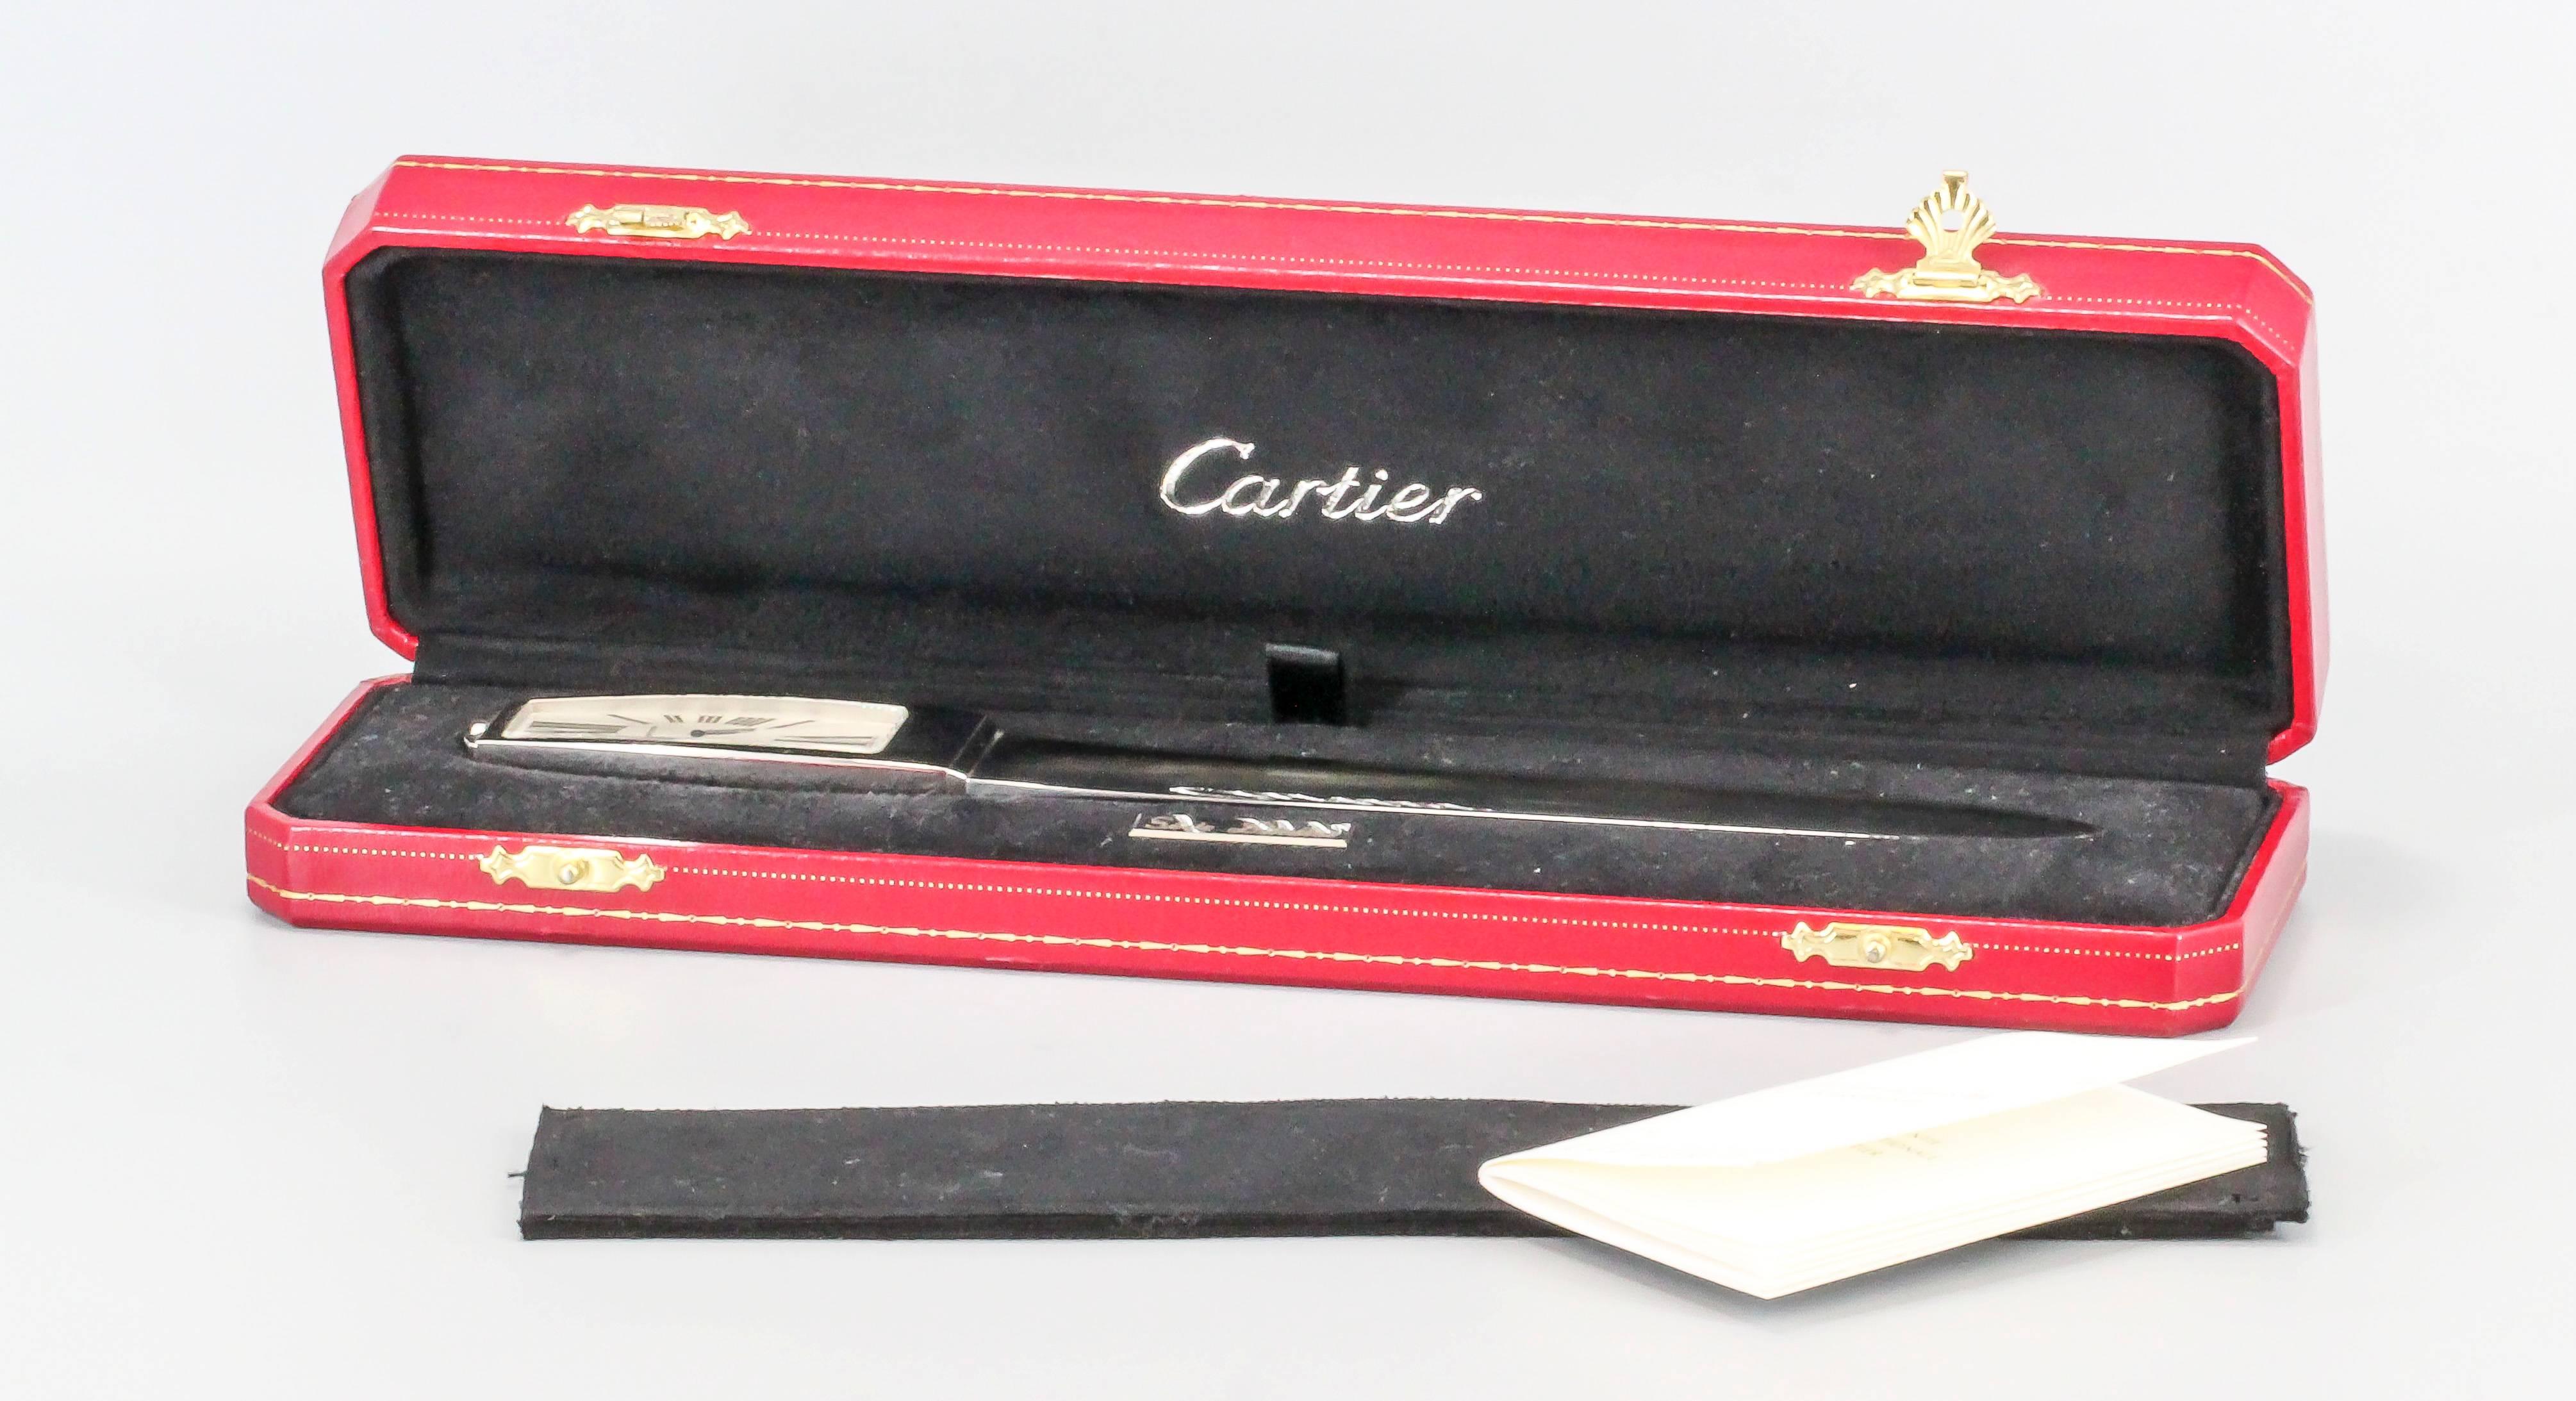 Handsome limited edition (#1118of 2000 made) clock/letter opener by Cartier. It features a large clock at the end of it, with a quartz movement and roman numerals. Comes with original Cartier box and papers. Beautifully made and would make a great